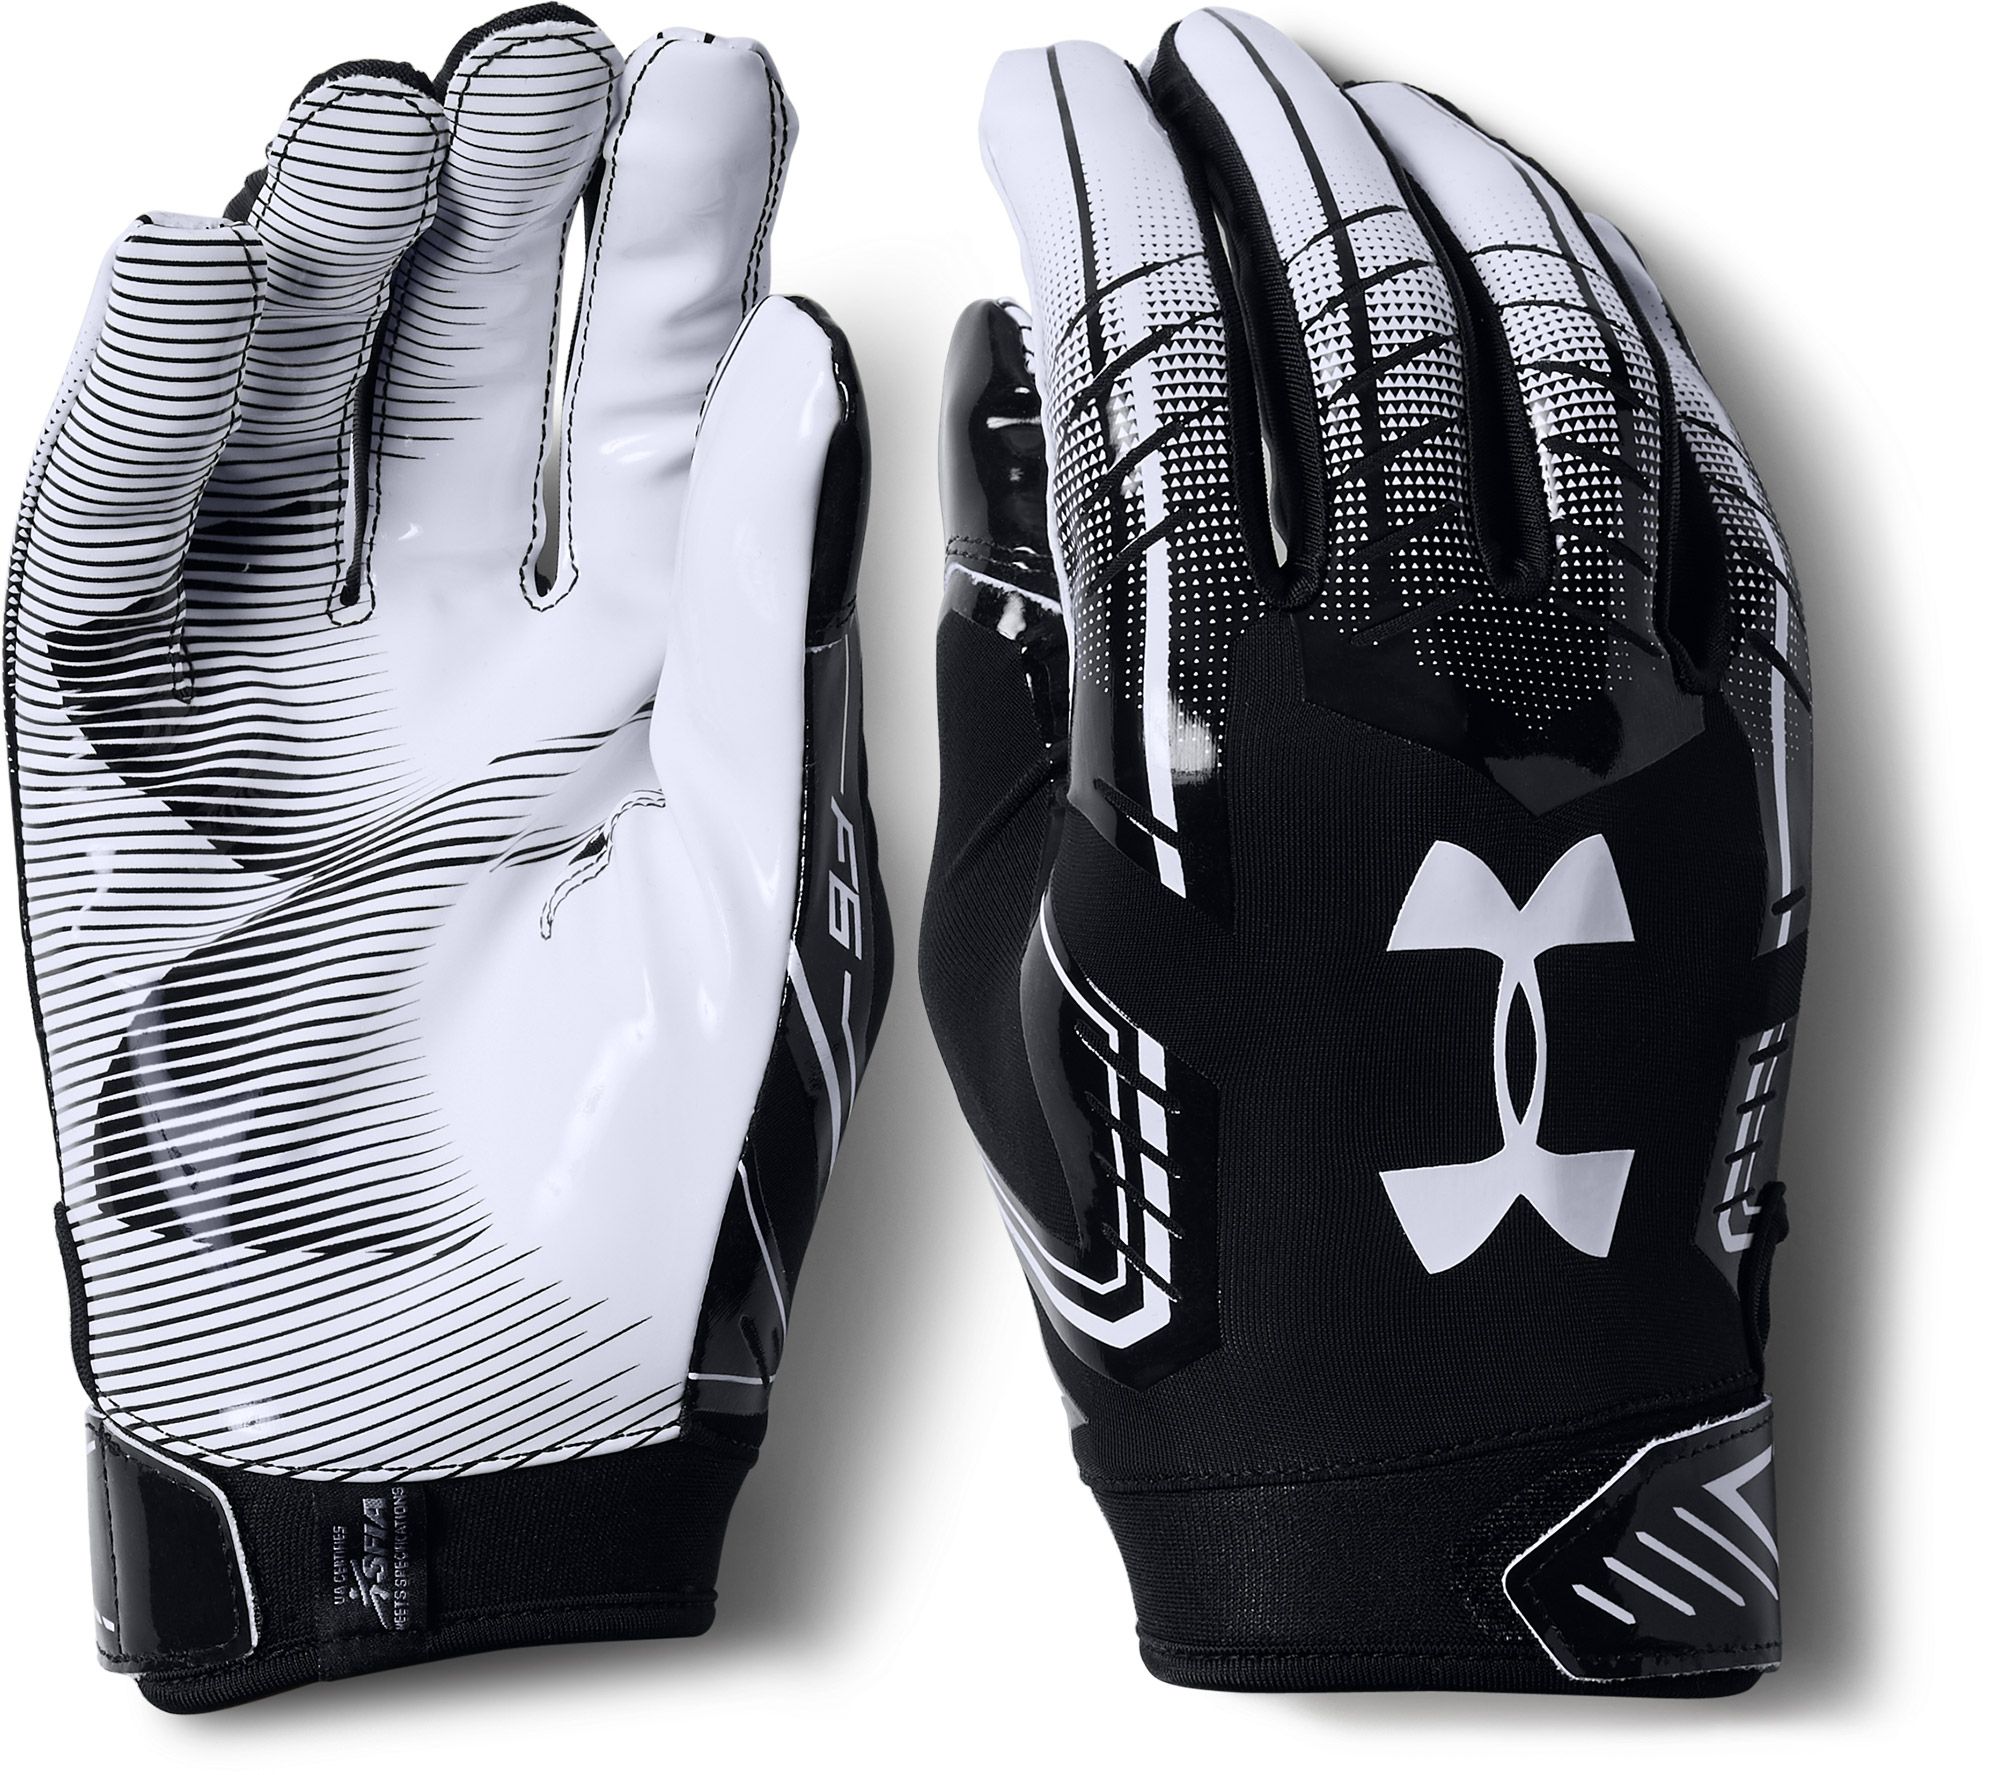 Mens Small for sale online 1304694 Under Armour F6 Adult Football Gloves 